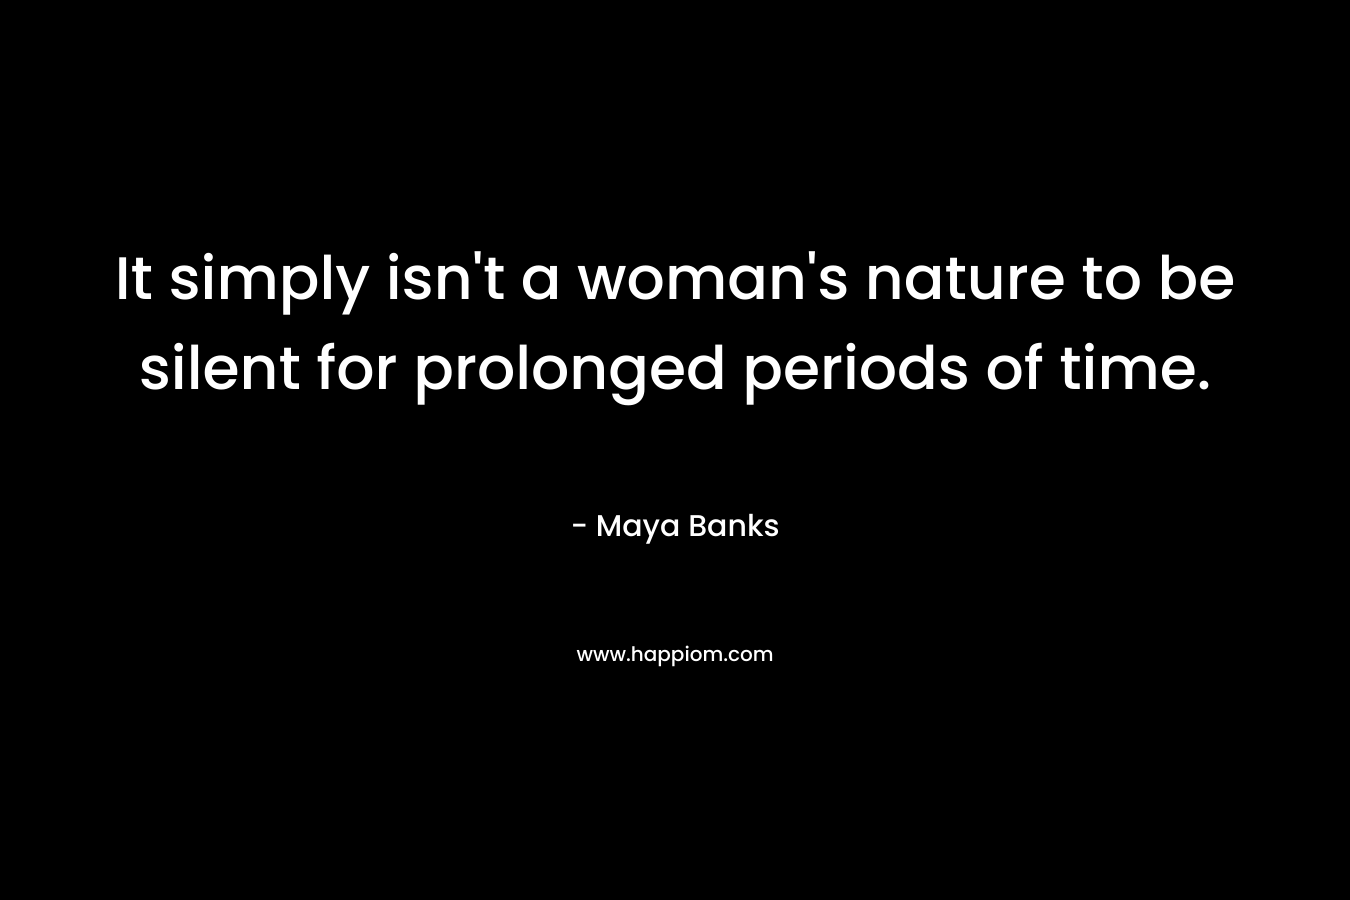 It simply isn't a woman's nature to be silent for prolonged periods of time.